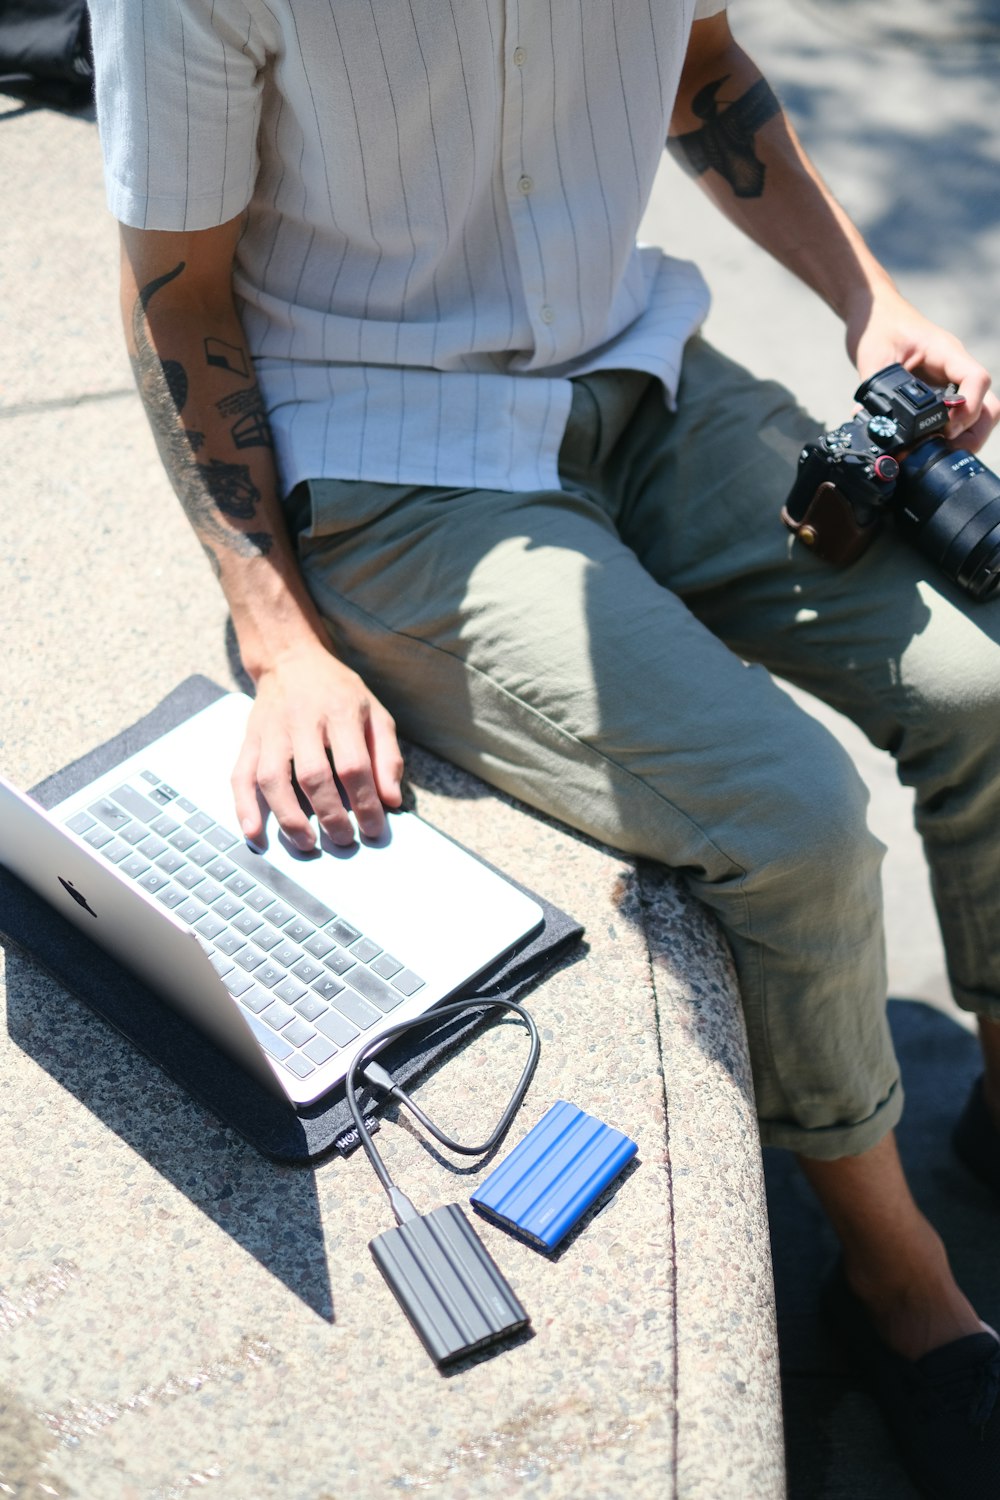 a person sitting on the ground with a laptop and camera